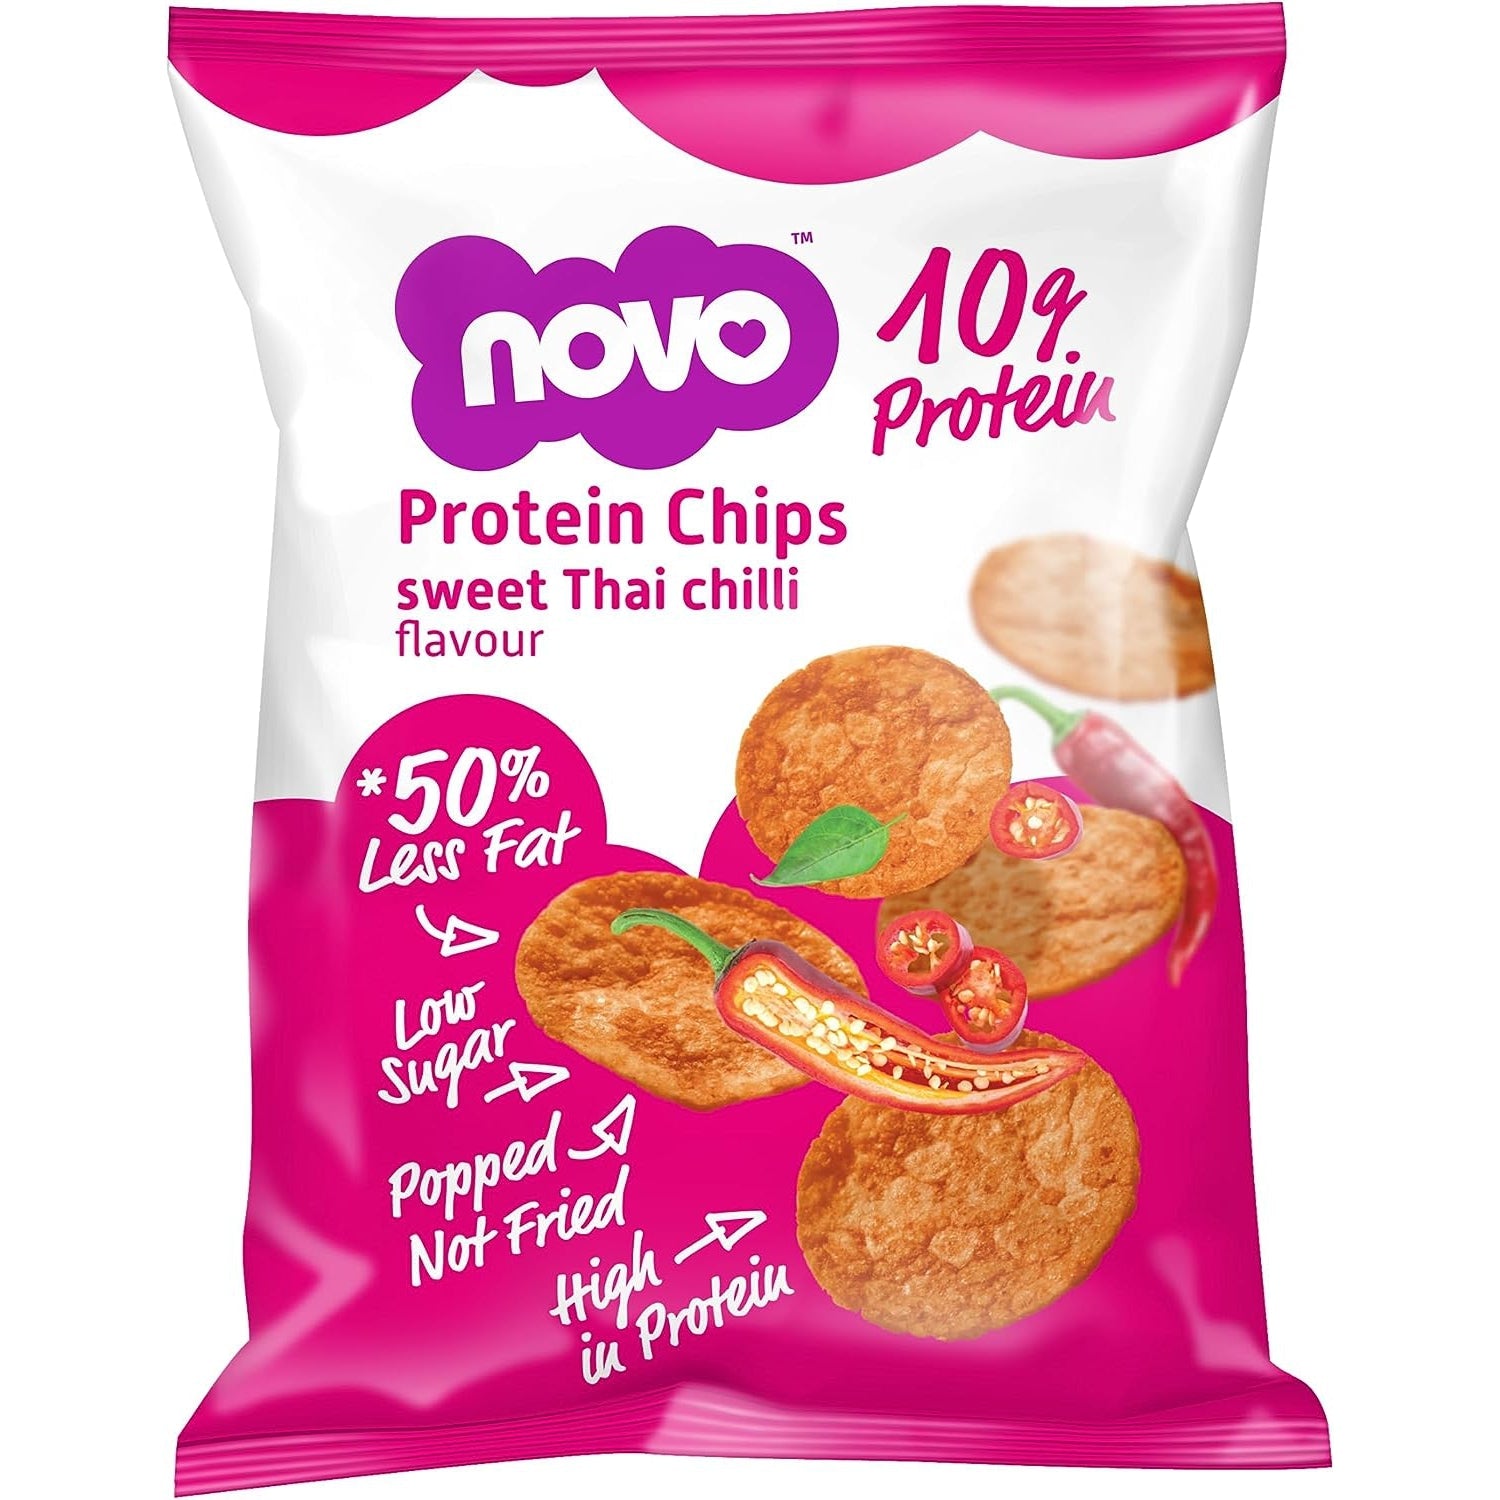 Novo Nutrition Protein Chips Healthy Savoury Snack with High Protein 30g - Sweet Chilli